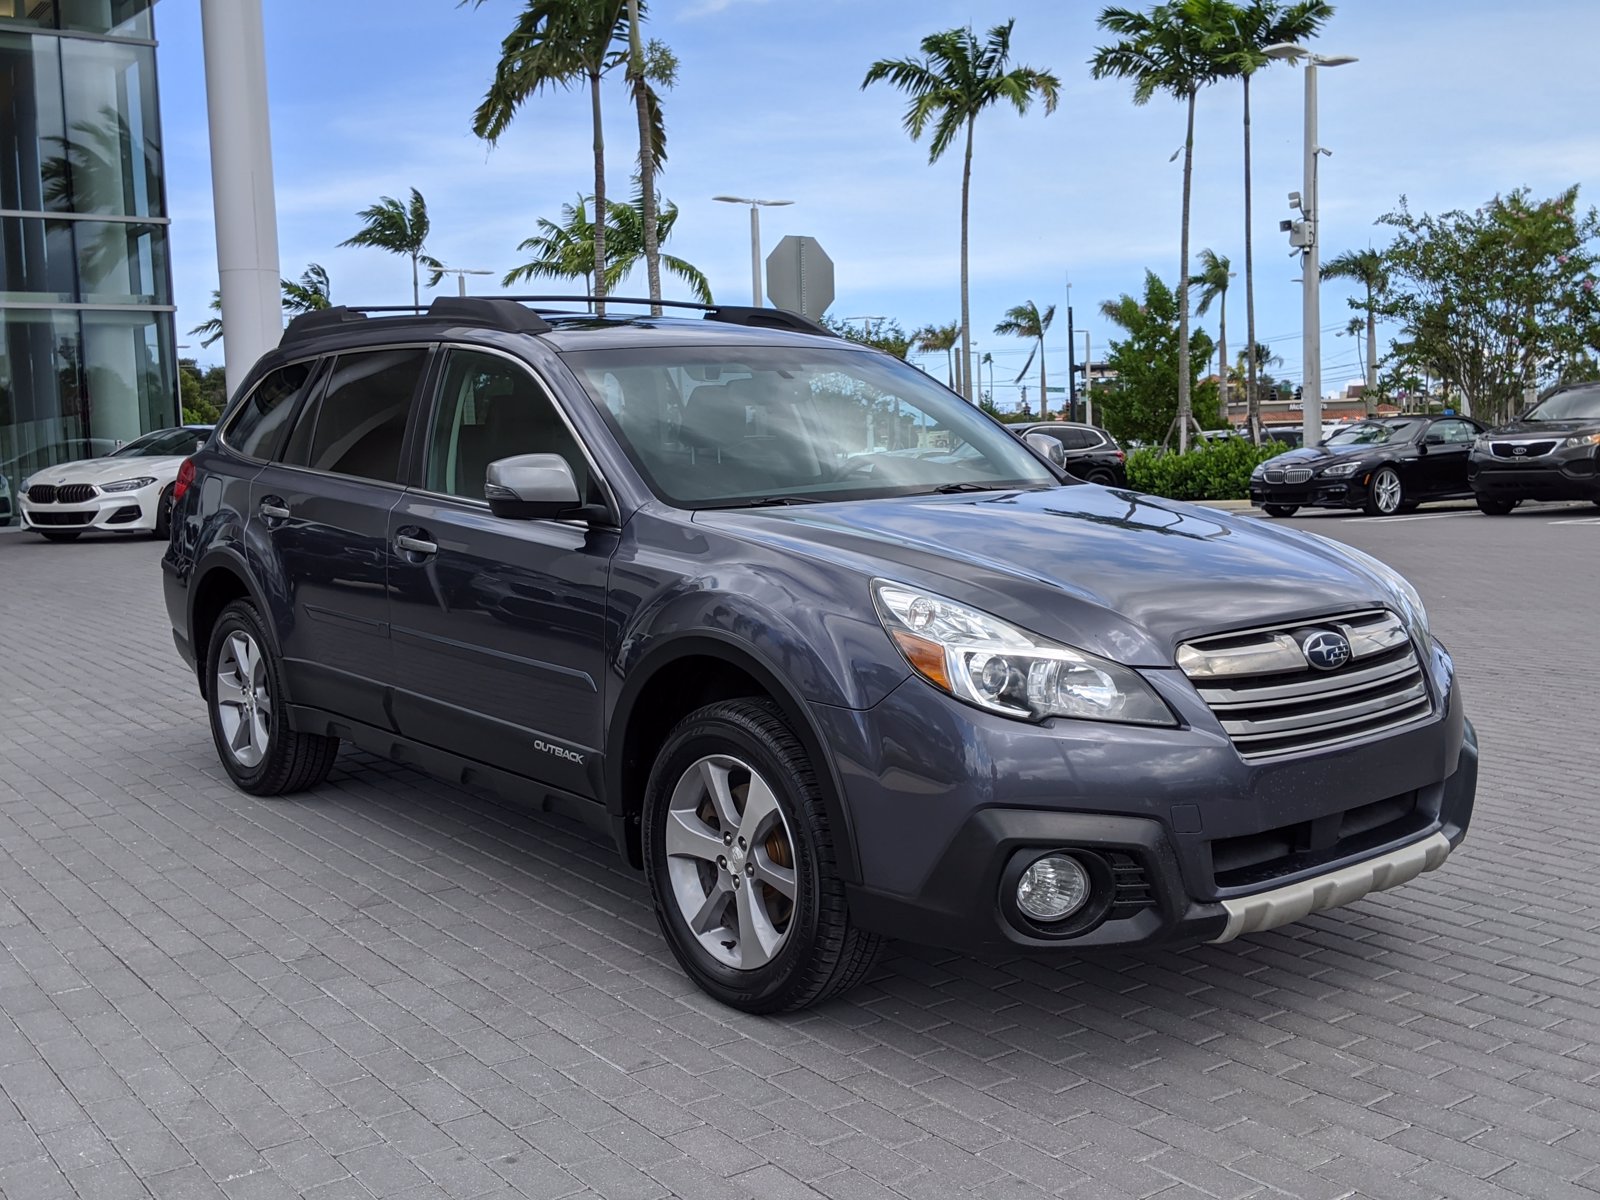 PreOwned 2014 Subaru Outback 3.6R Limited